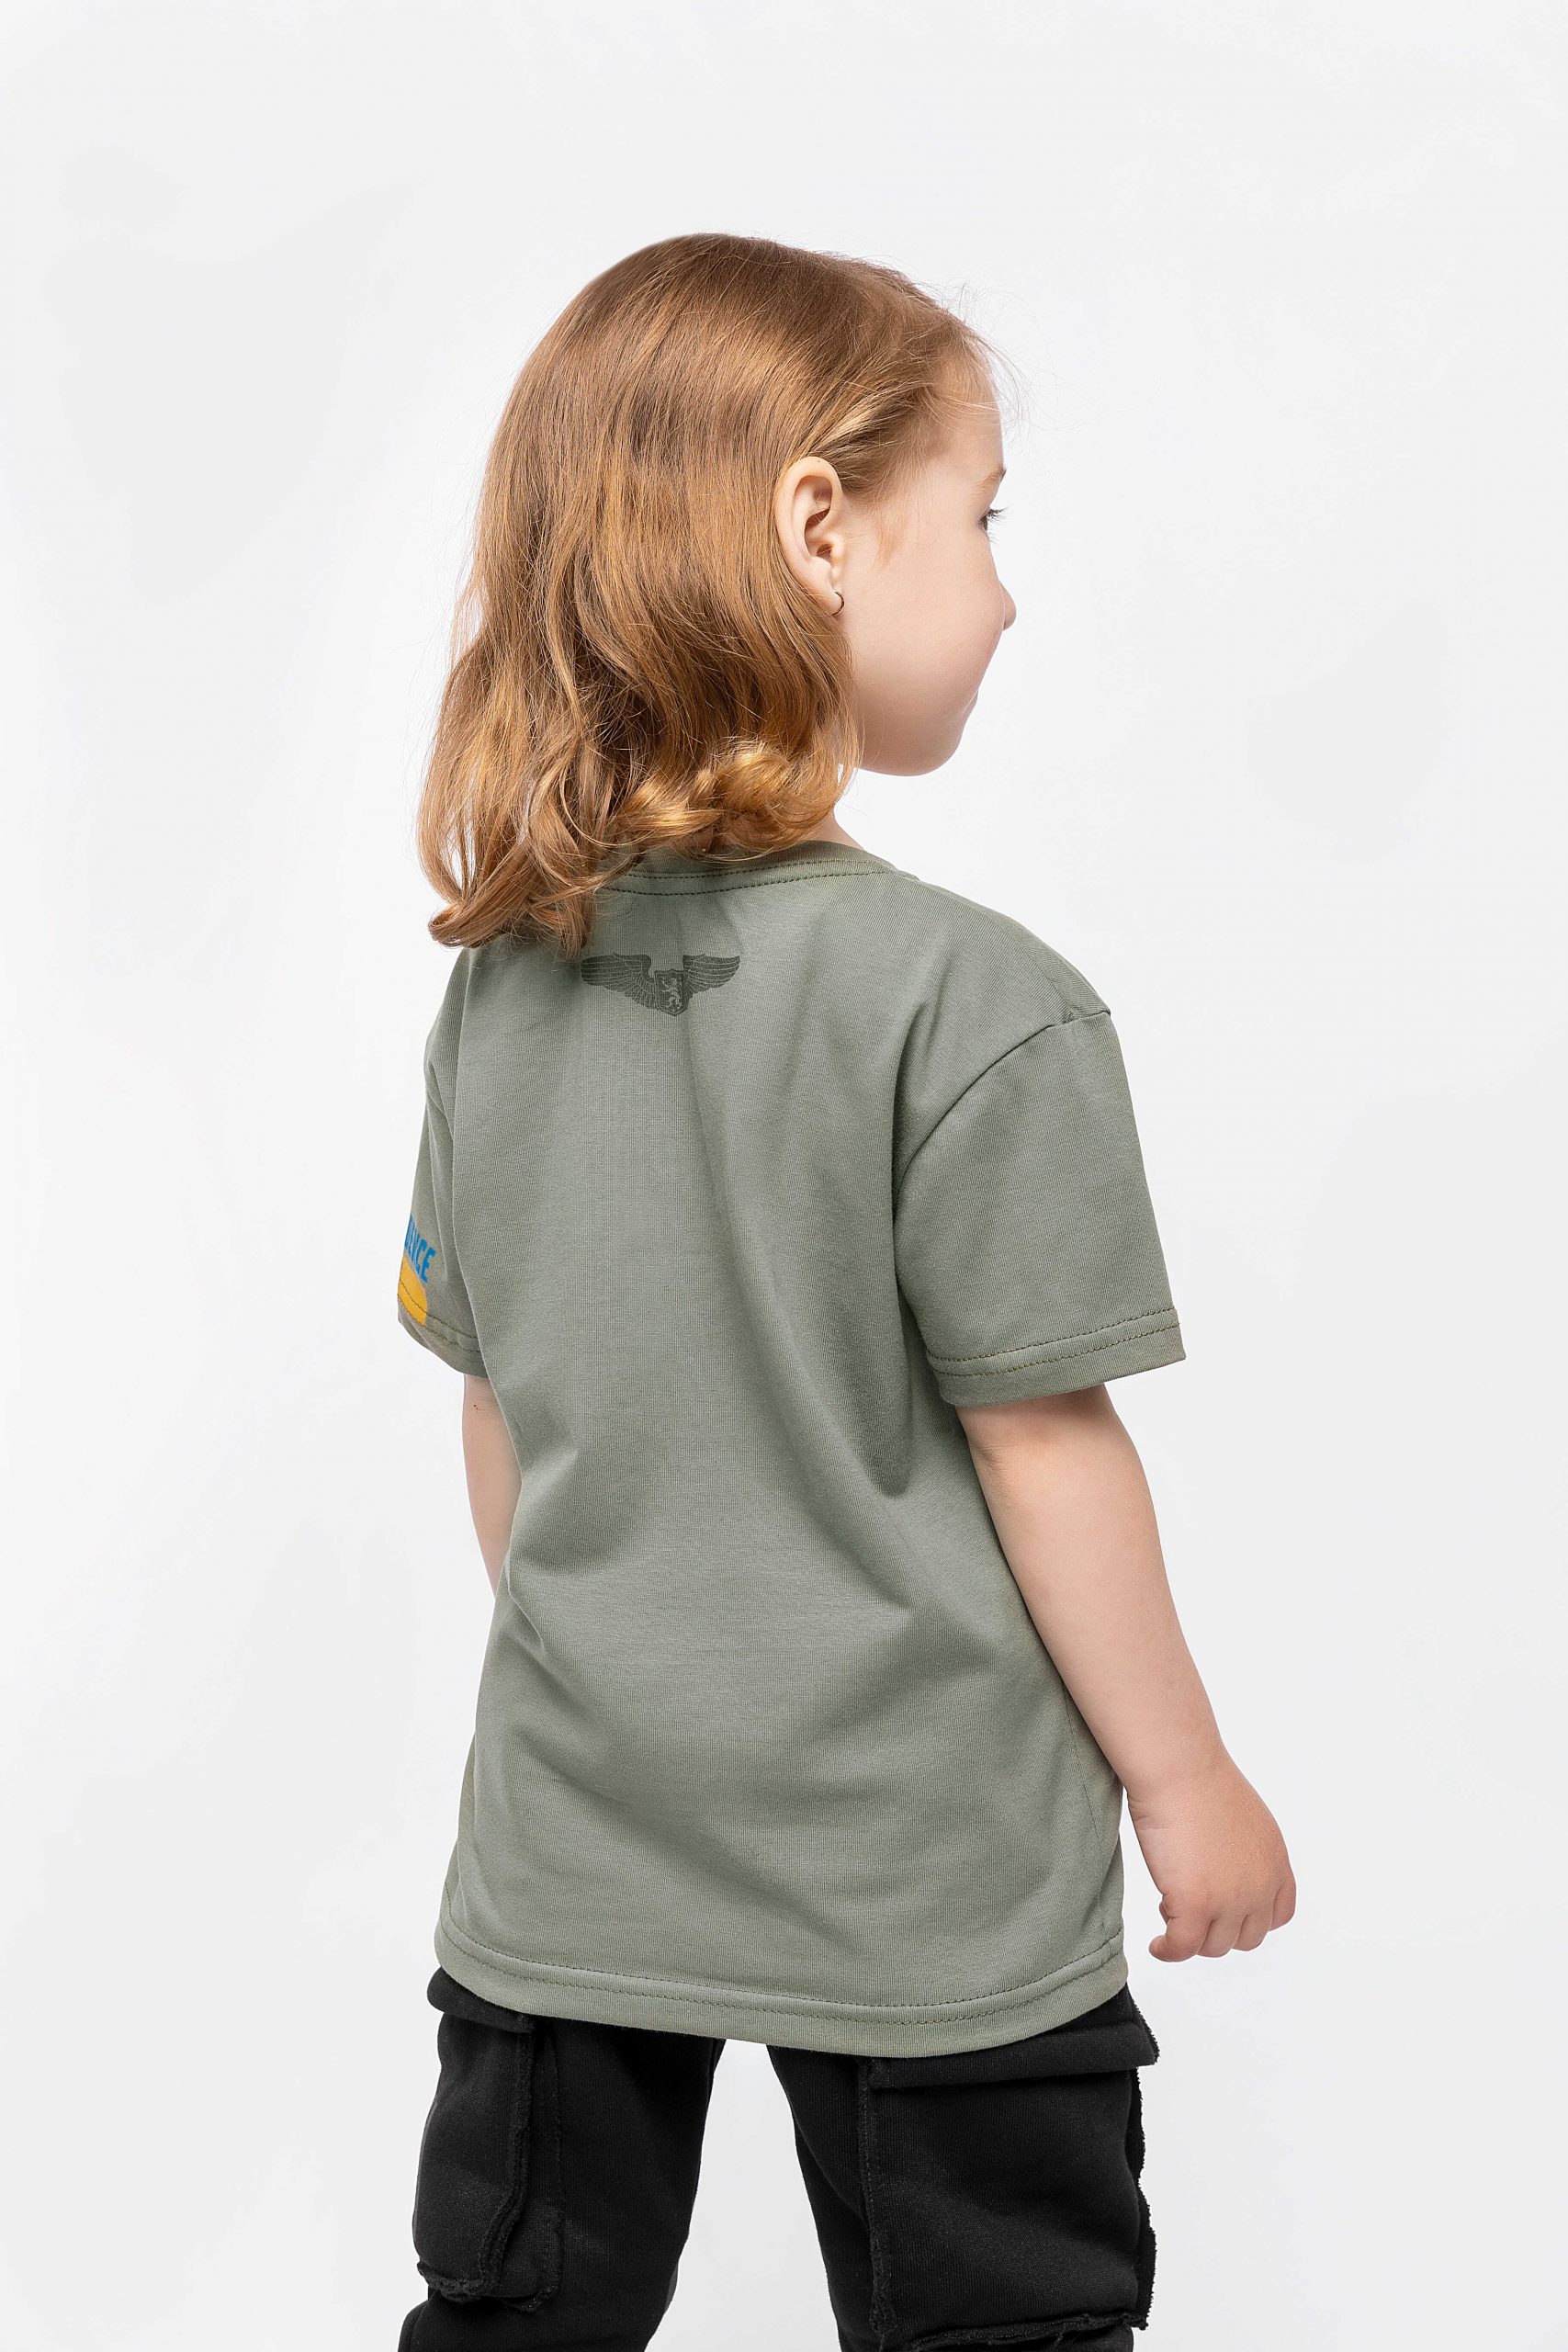 Kids T-Shirt We Are From Ukraine.h. Color khaki. 1.